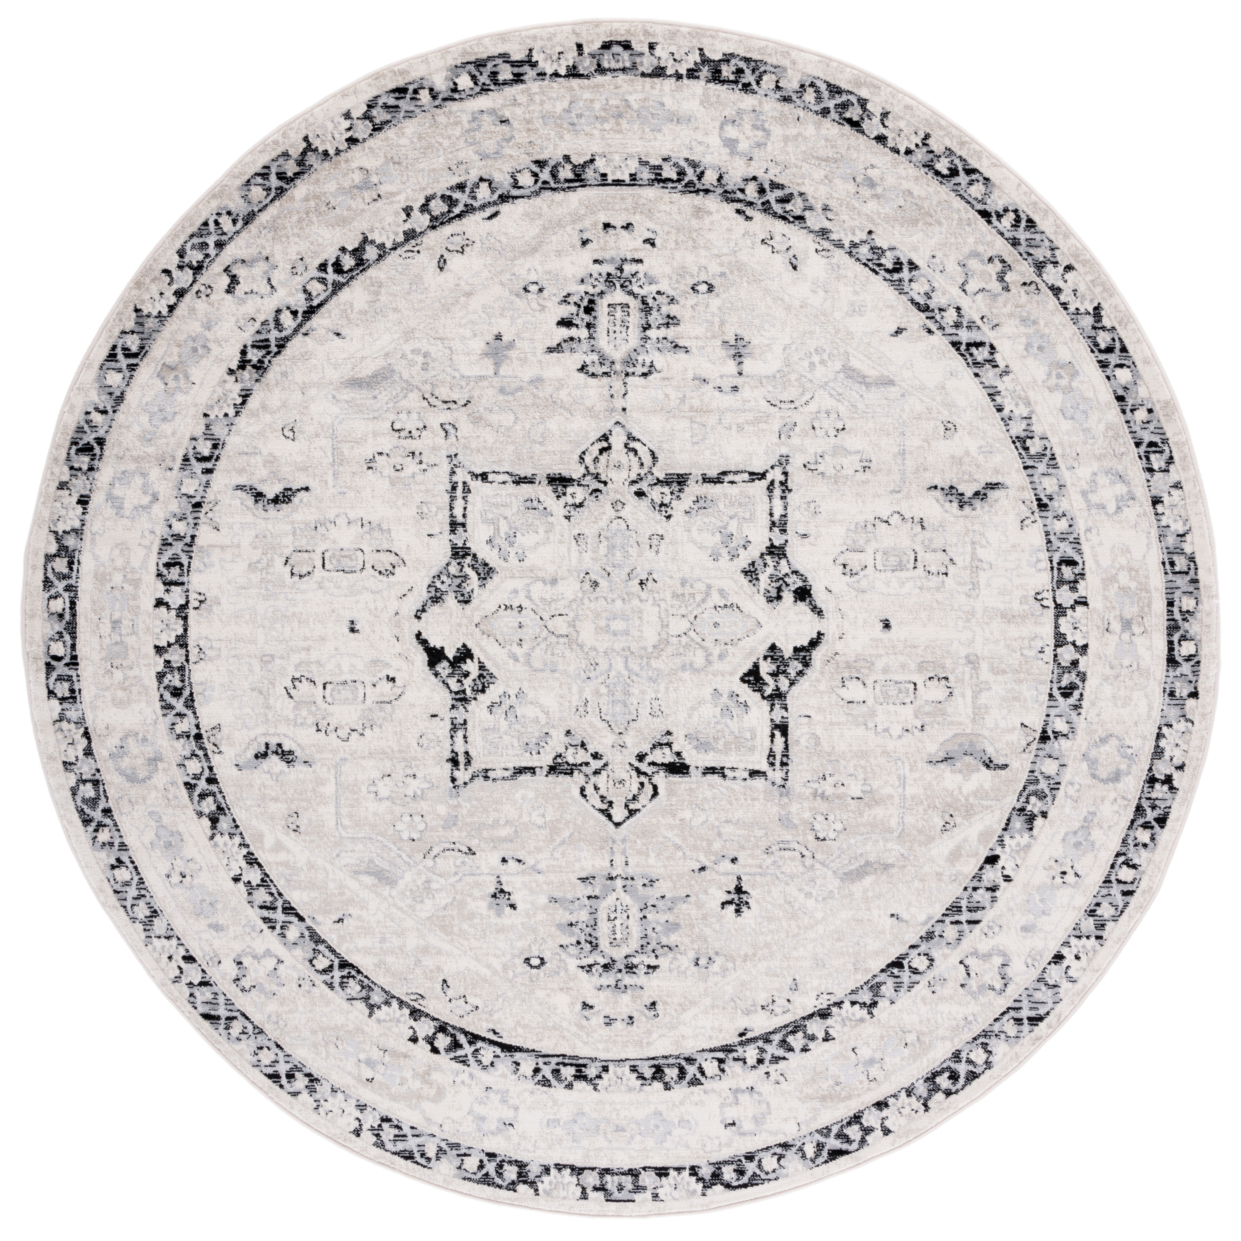 SAFAVIEH Brentwood Collection BNT852A Ivory / Black Rug - 6' X 9'